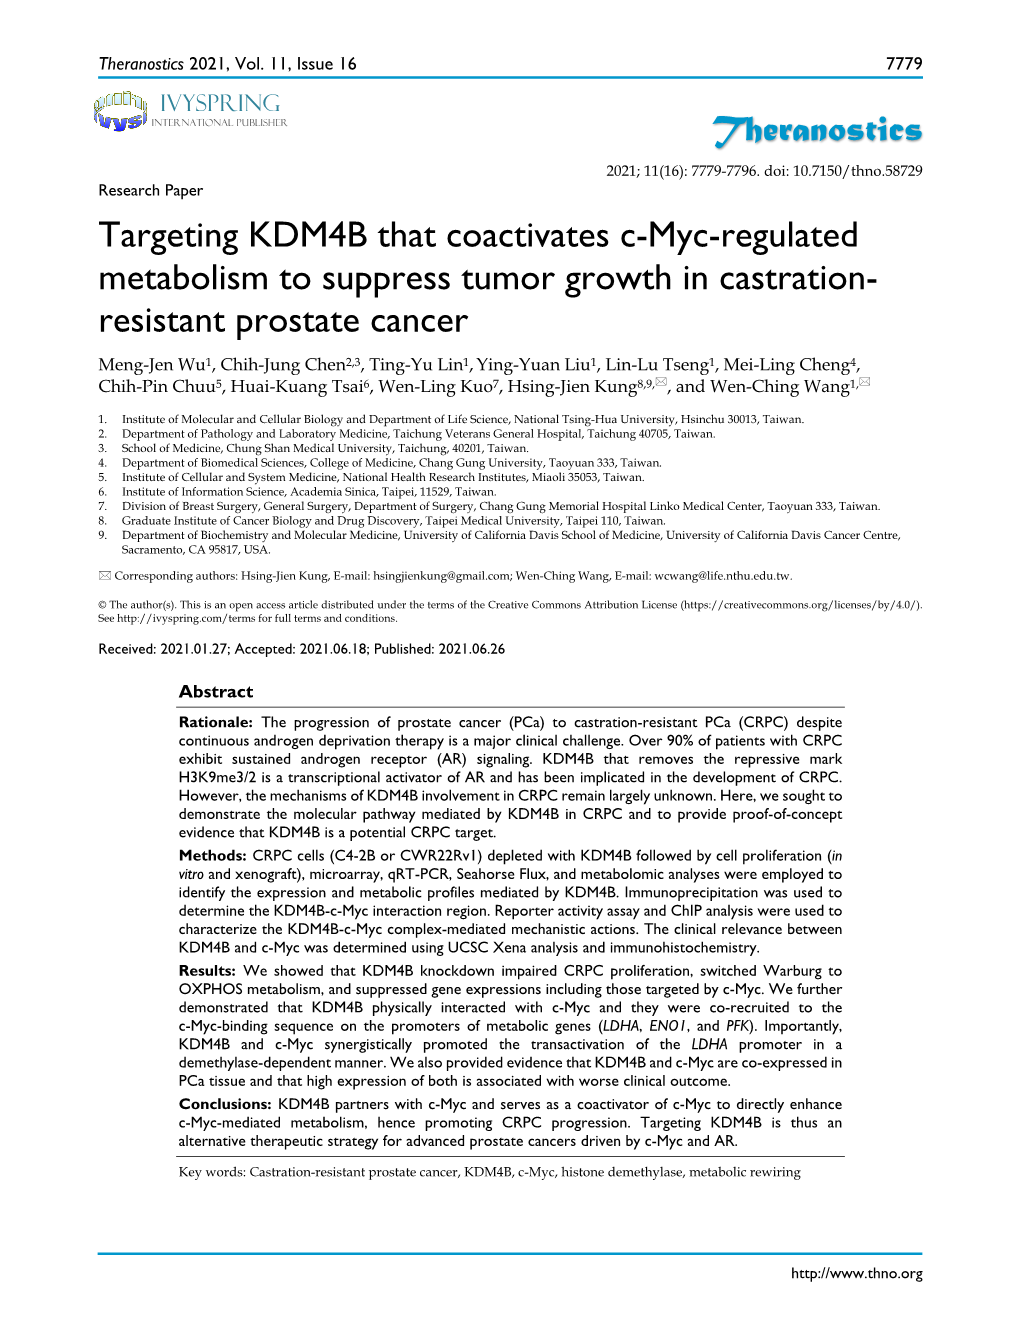 Theranostics Targeting KDM4B That Coactivates C-Myc-Regulated Metabolism to Suppress Tumor Growth in Castration- Resistant Prost